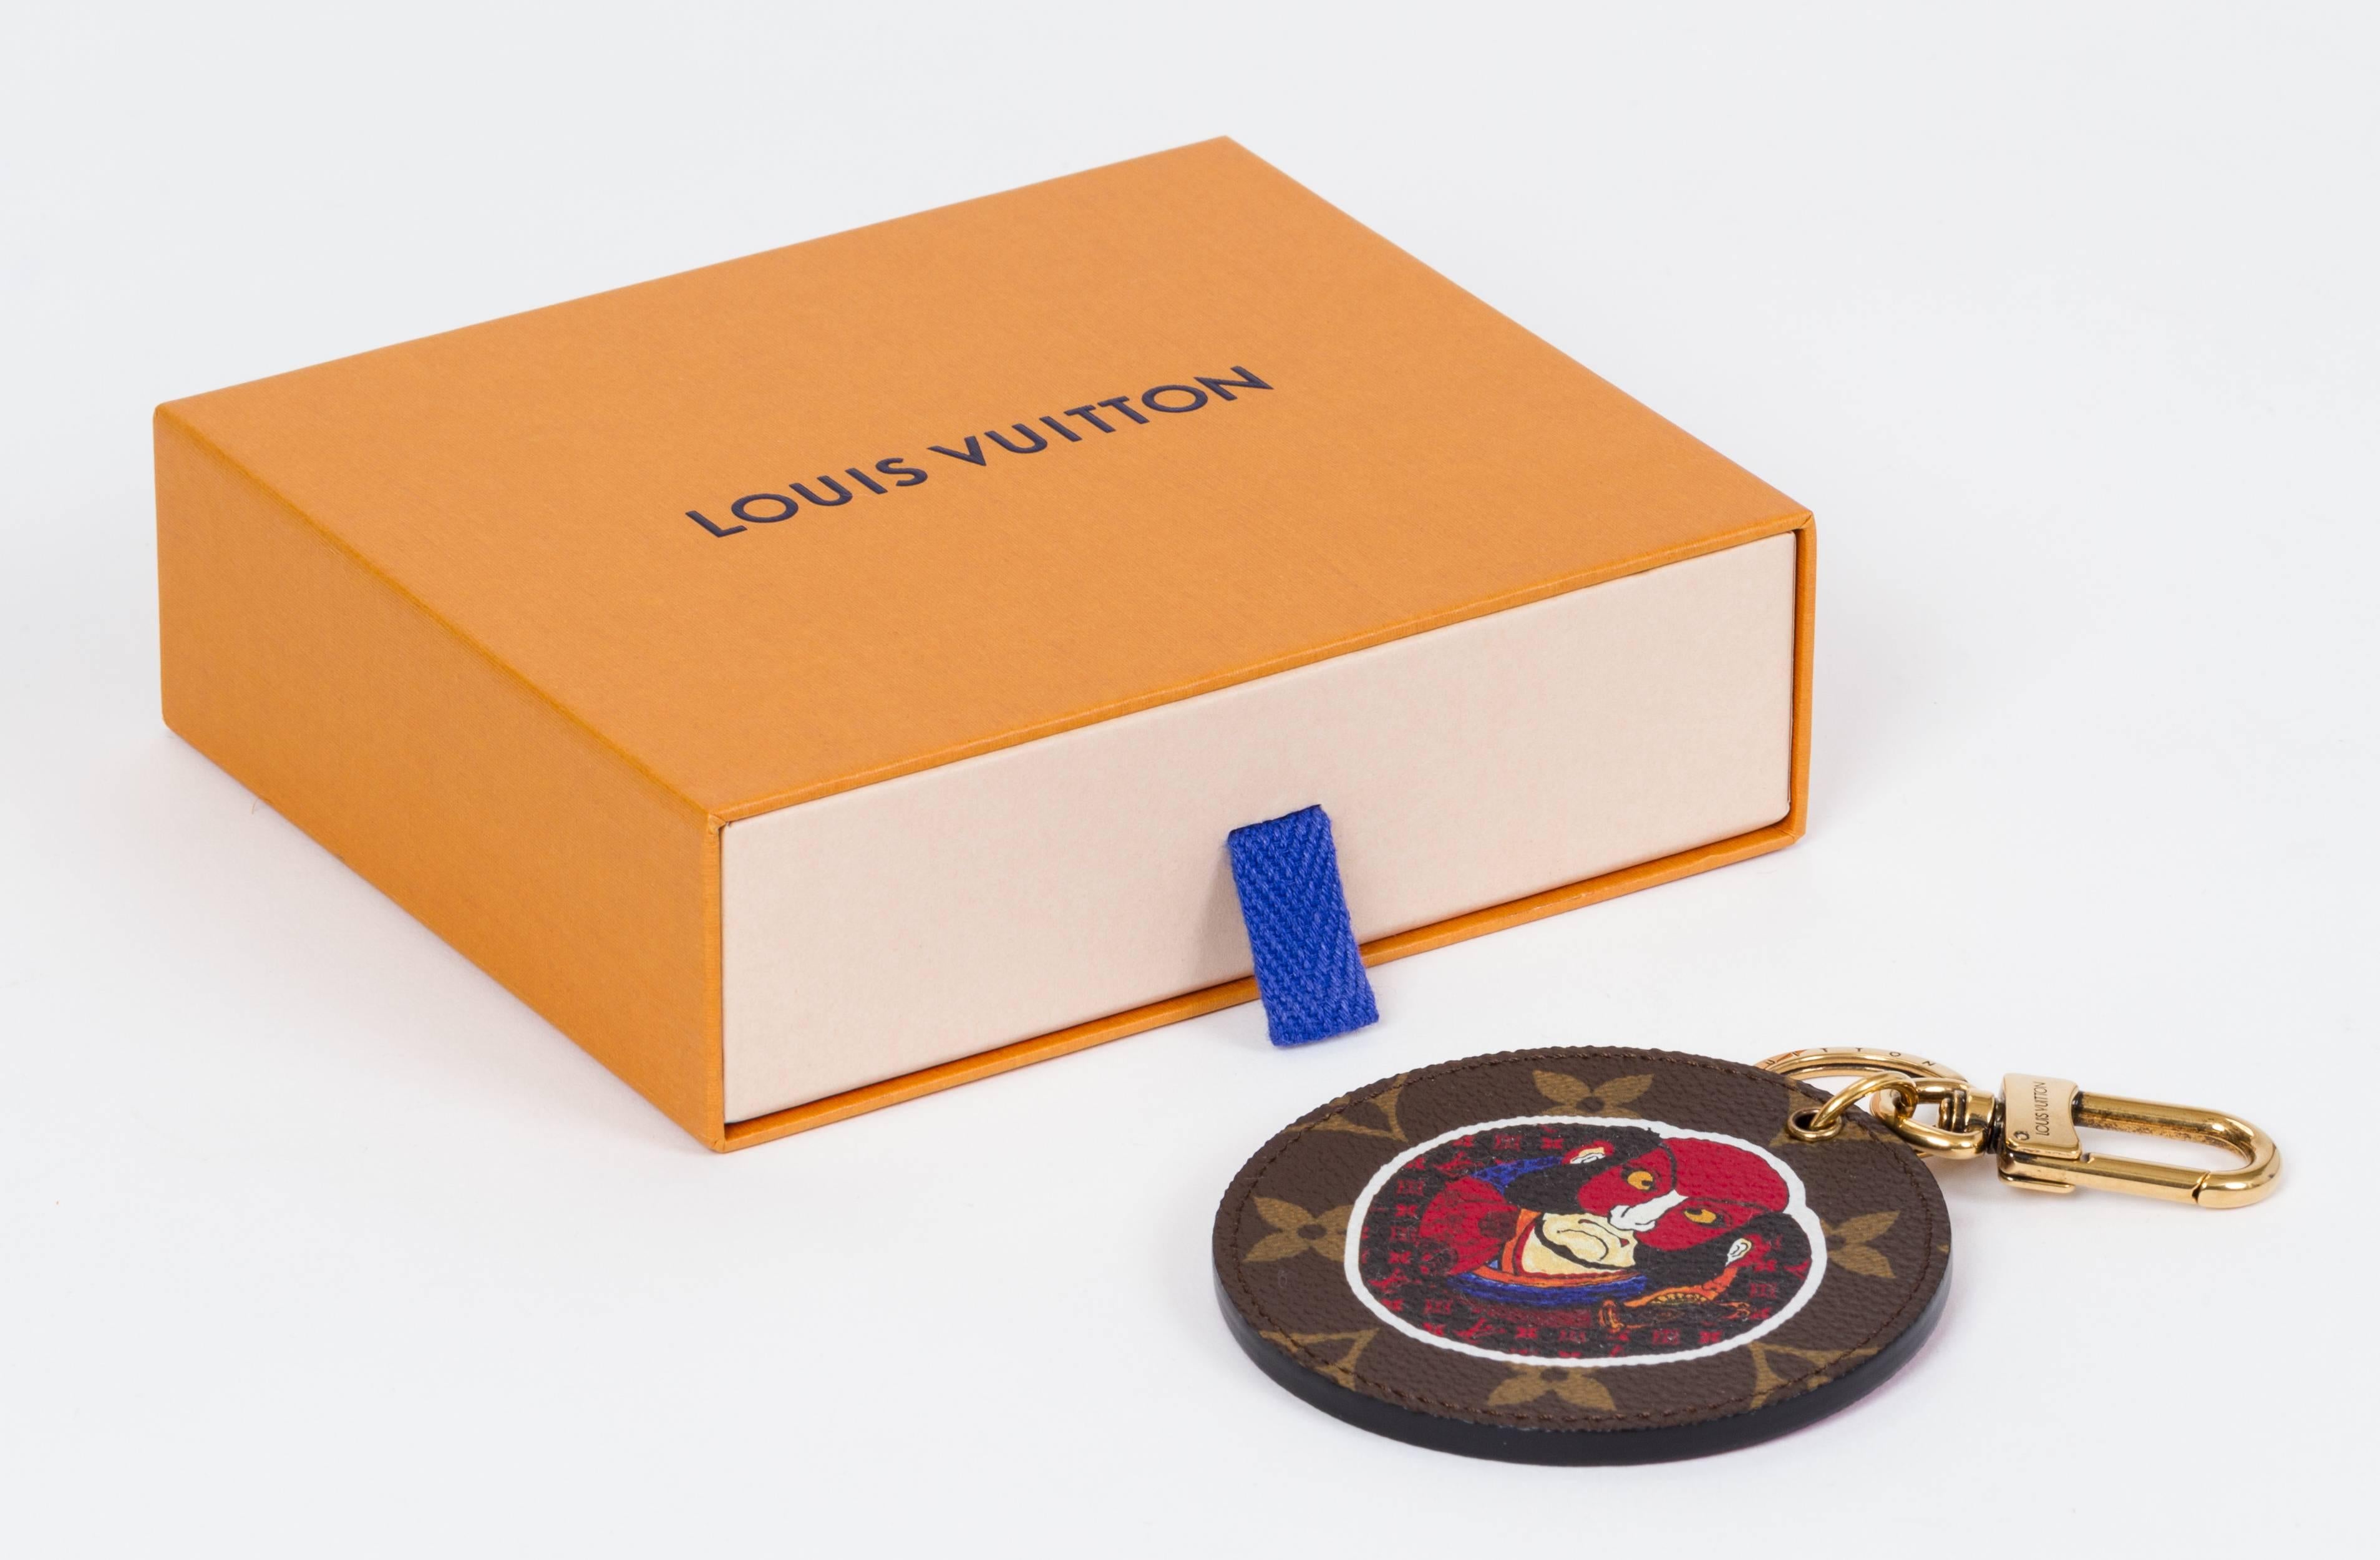 Louis Vuitton sold out kabuki spring summer 2018 collection keychain, bag charm . Comes with original dust cover and box.